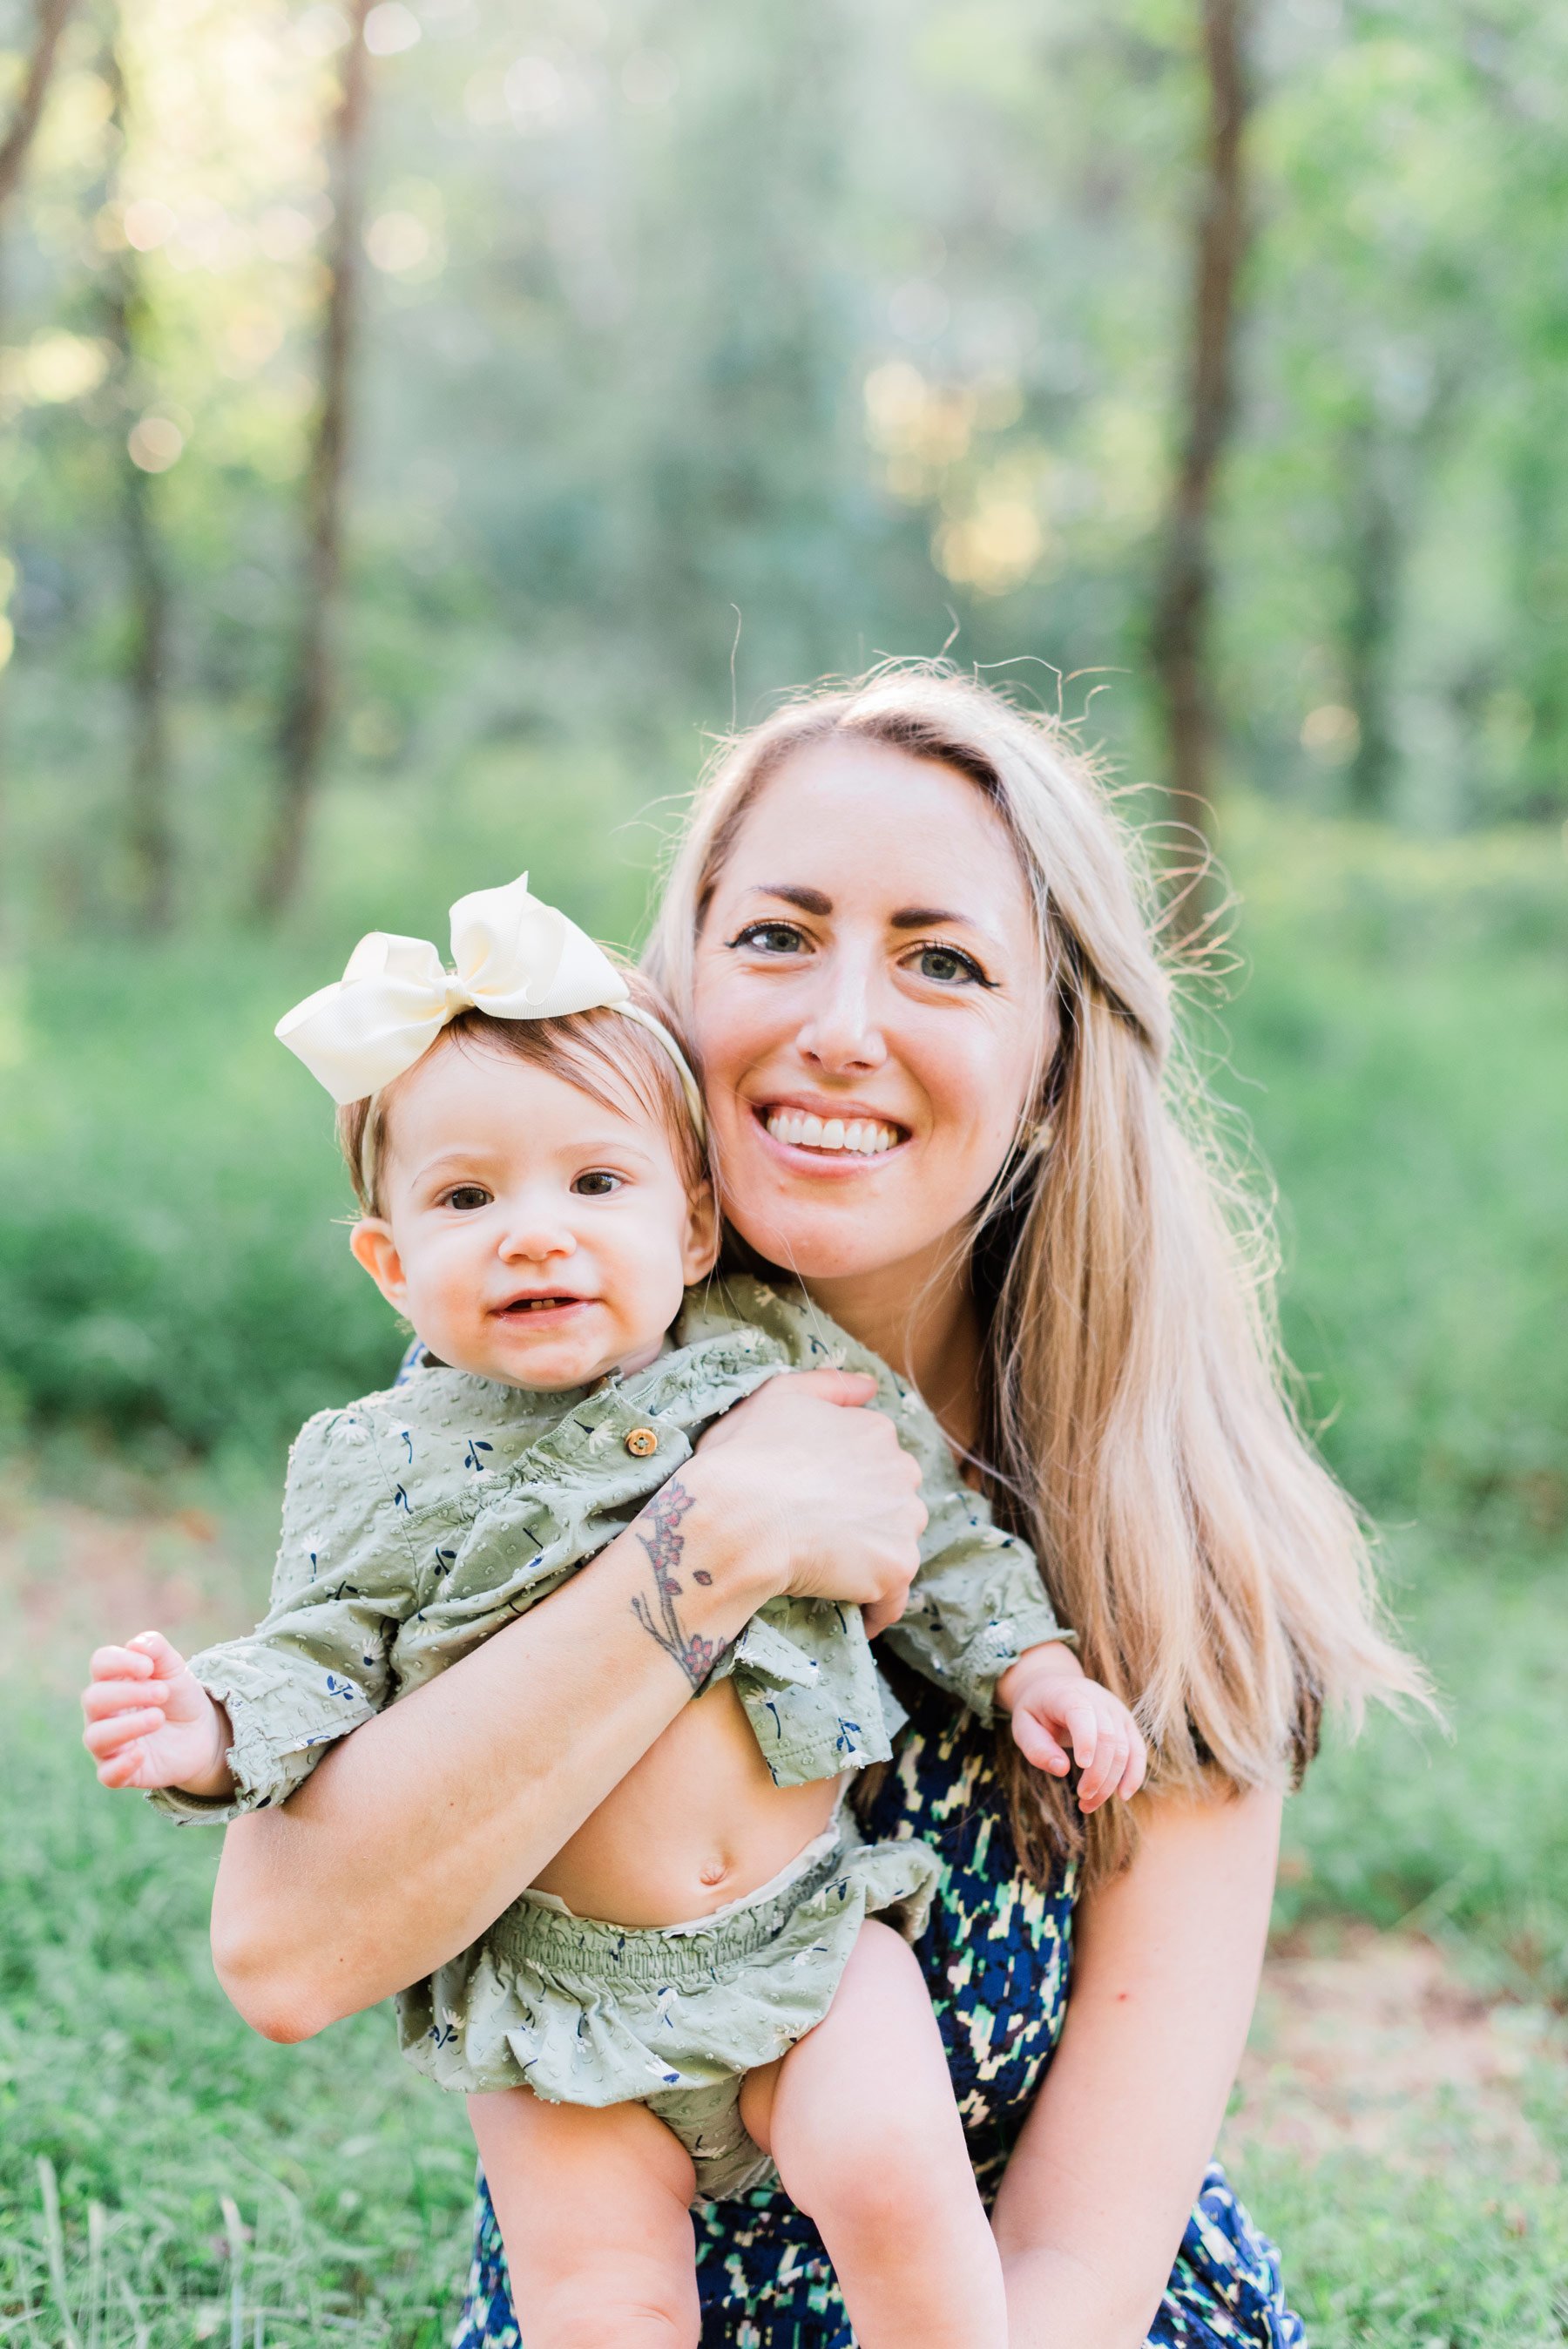    A Georgia mom and daughter smile for the camera with green grass in the background. #peachtreecityphotographer #familyphotographersenoia #outdoorfamilyphotos #familyphotoswithkids #fayettevillefamilyphotographer #fallfamilyphotographer #georgiafam